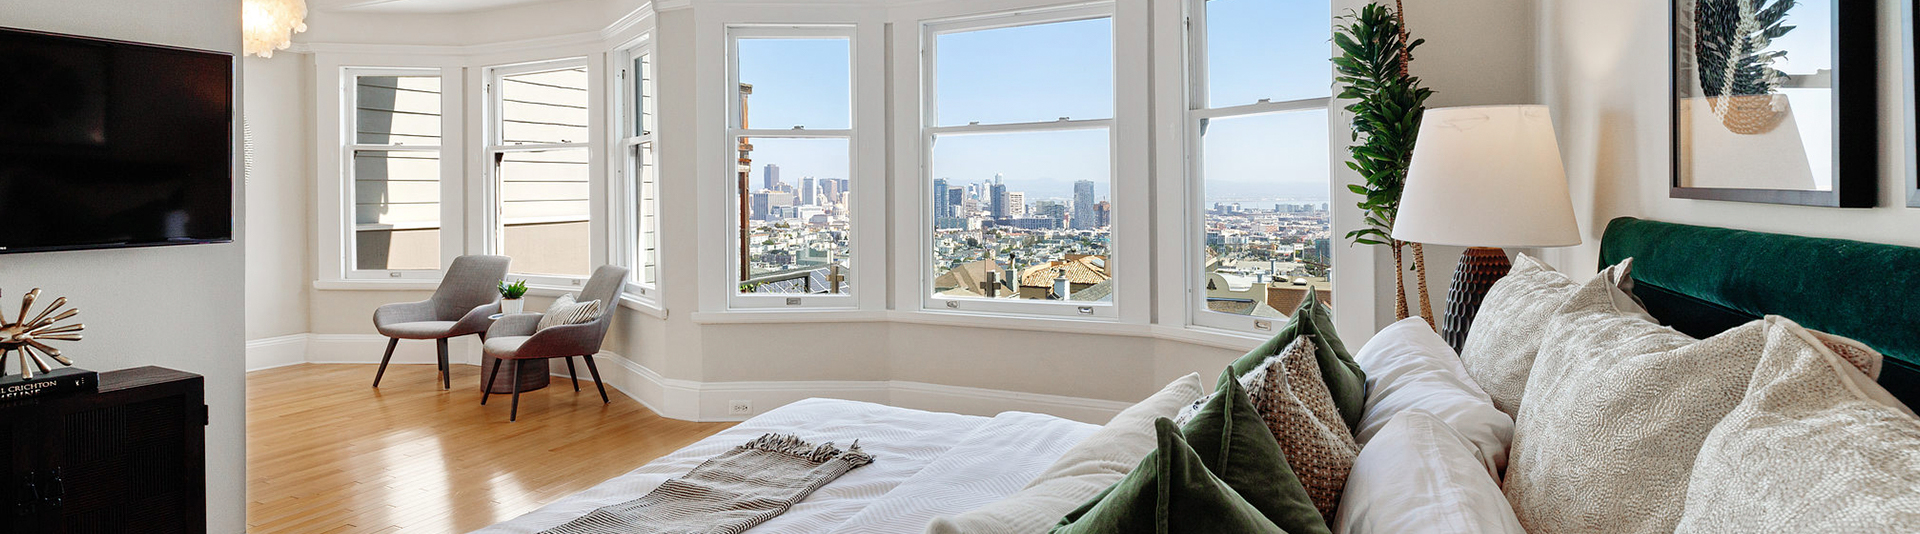 A bed room with a view of the San Francisco skyline